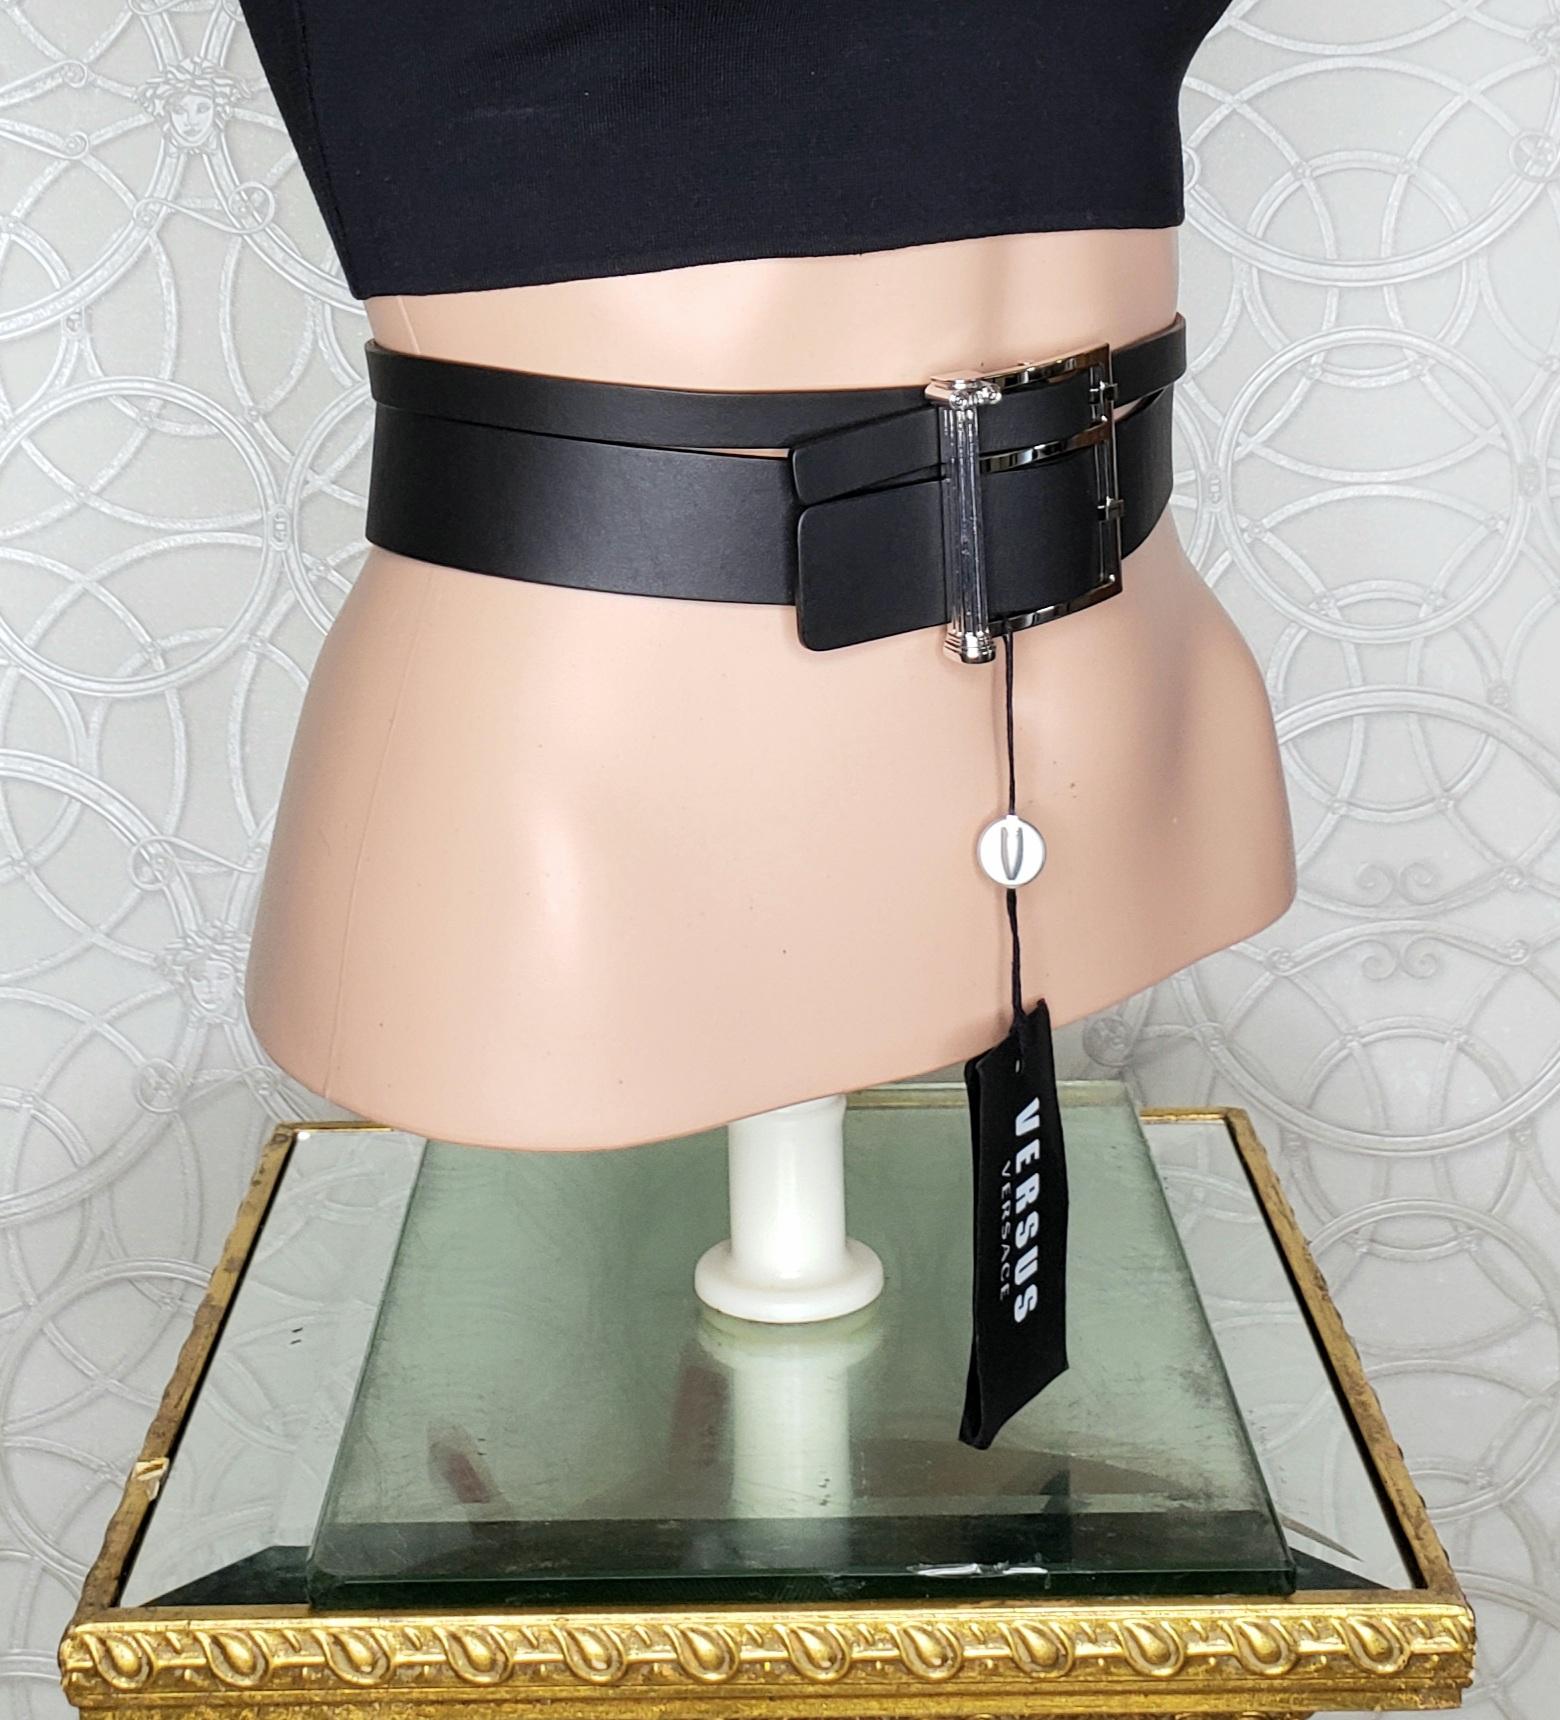 Black VERSUS+ANTHONY VACCARELLO BLACK LEATHER DOUBLE BELT w/SILVER COLUMN BUCKLE 75/30 For Sale